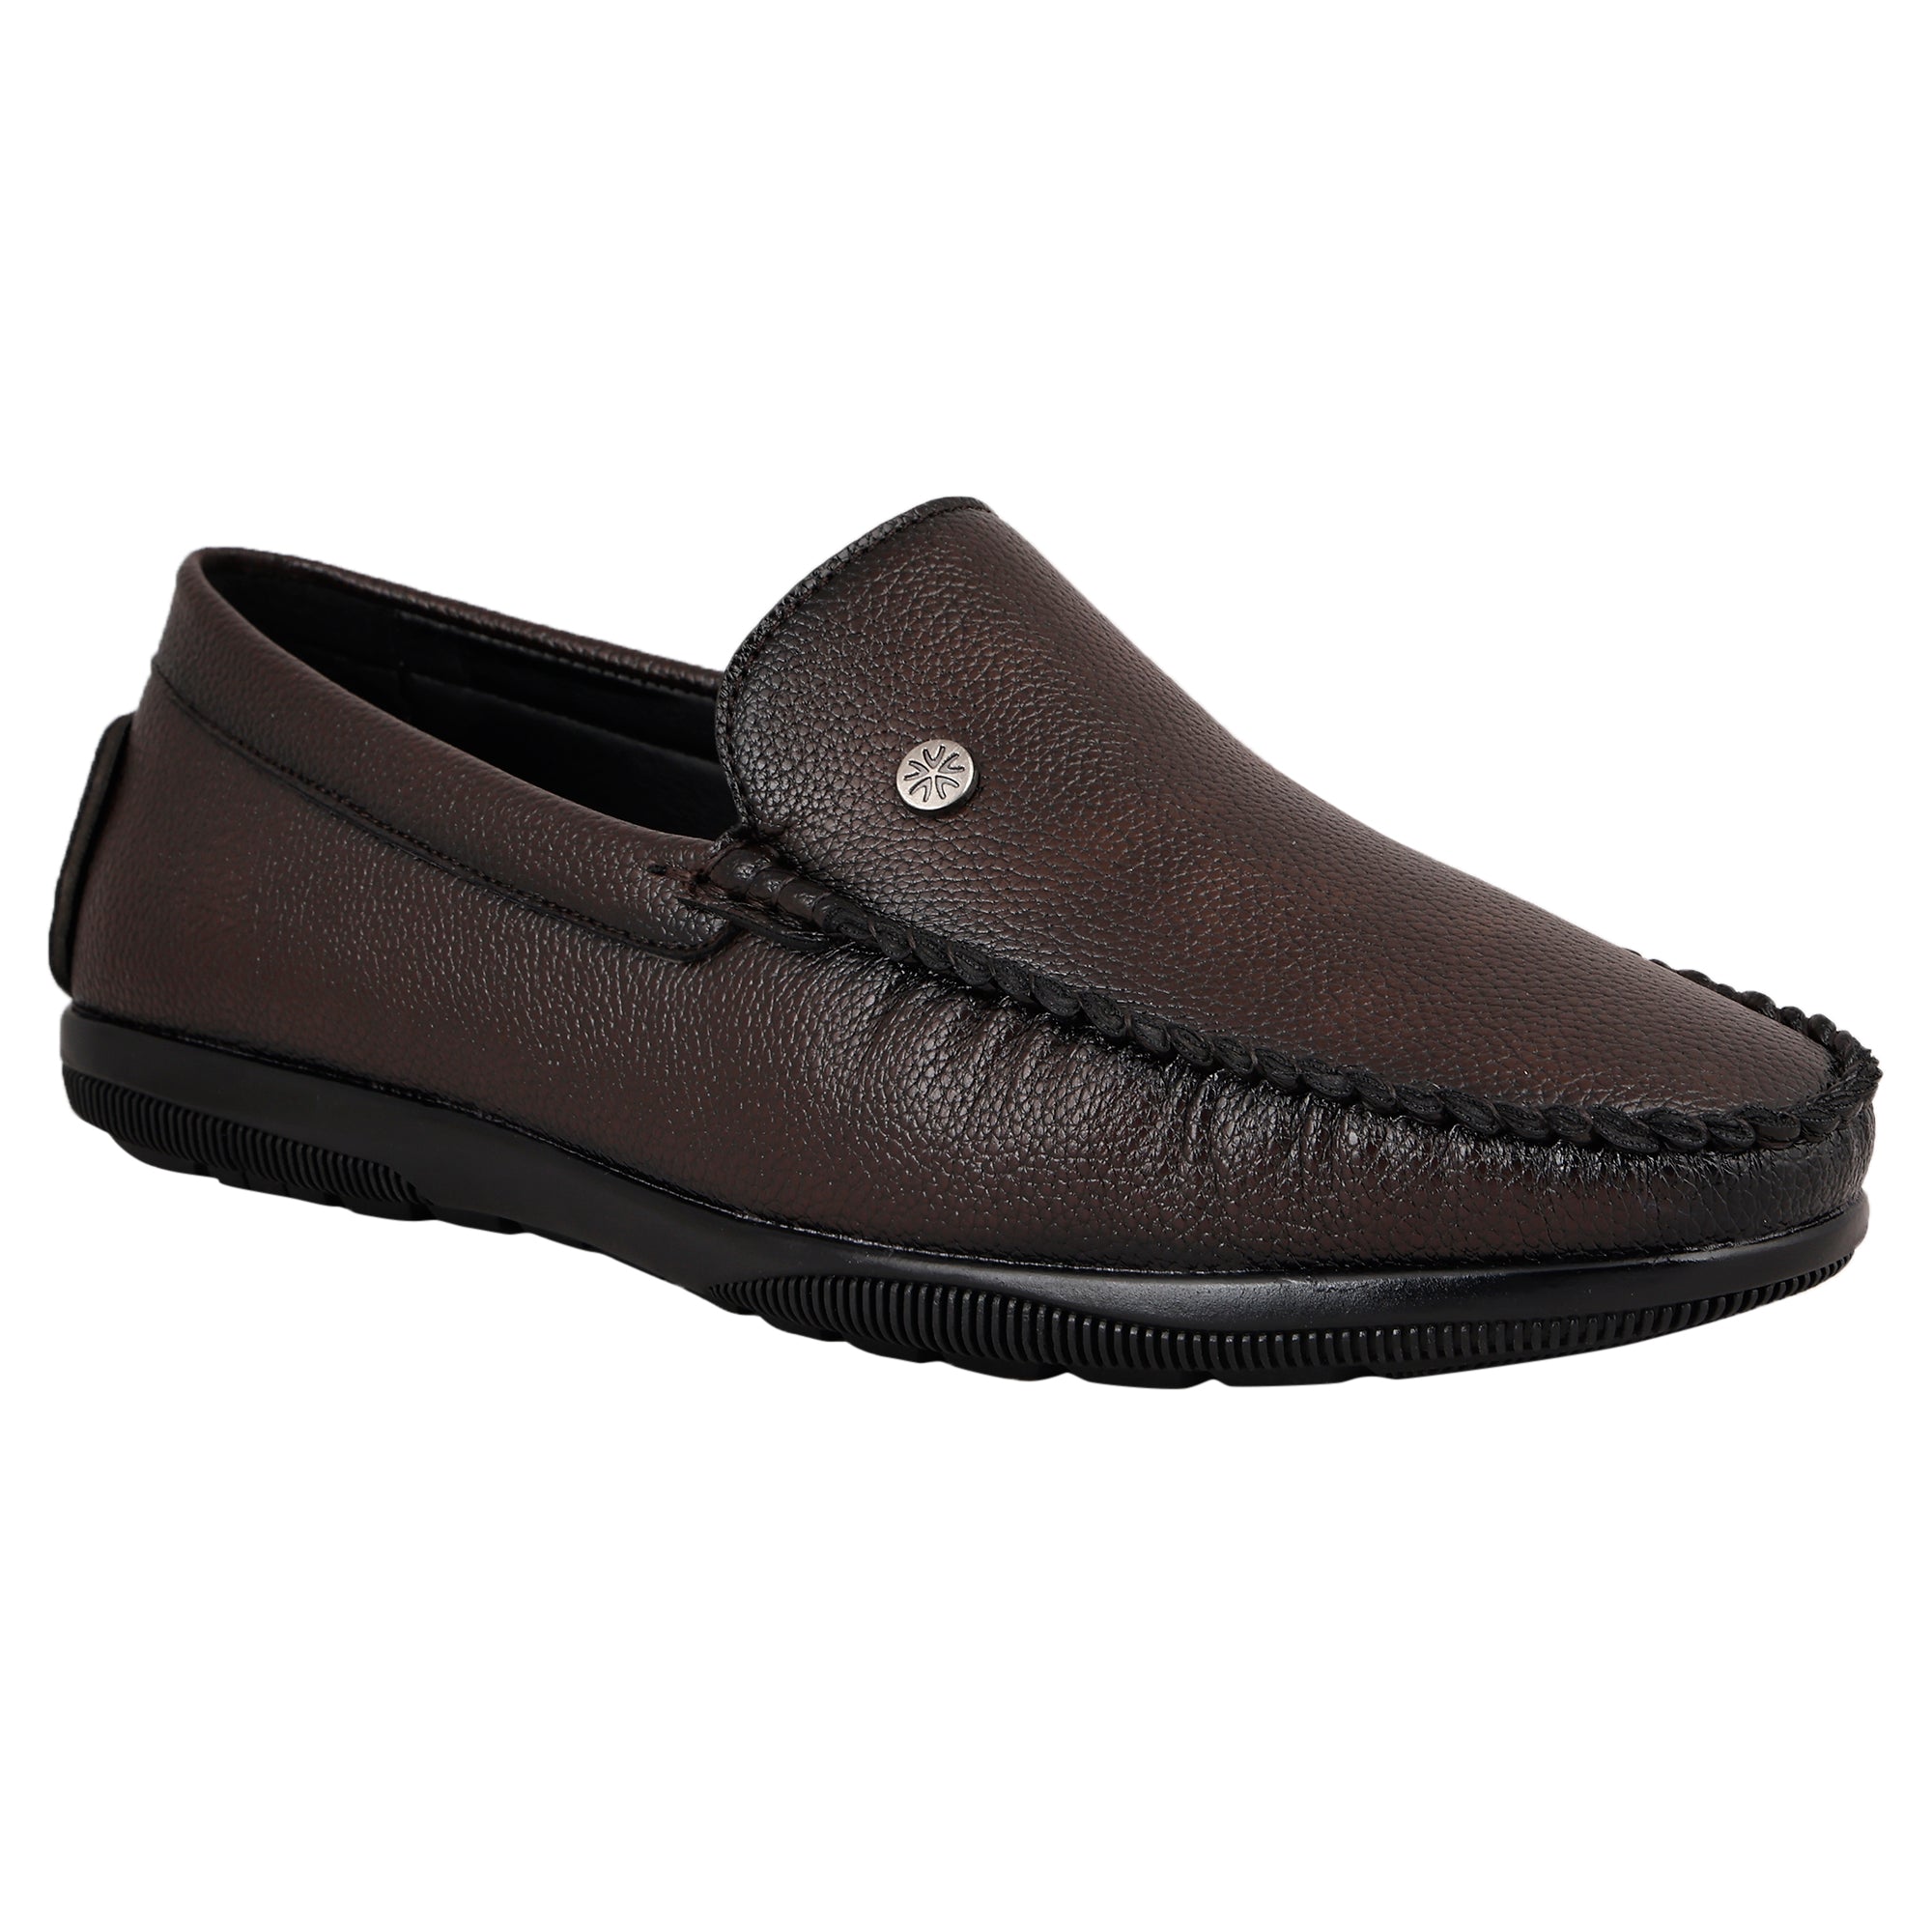 LB 45A Buckle Brunette Brown  Slip On Style Loafer Most Comfortable Doctor Insole With Wrinkle Free Fox Leather Loafers.